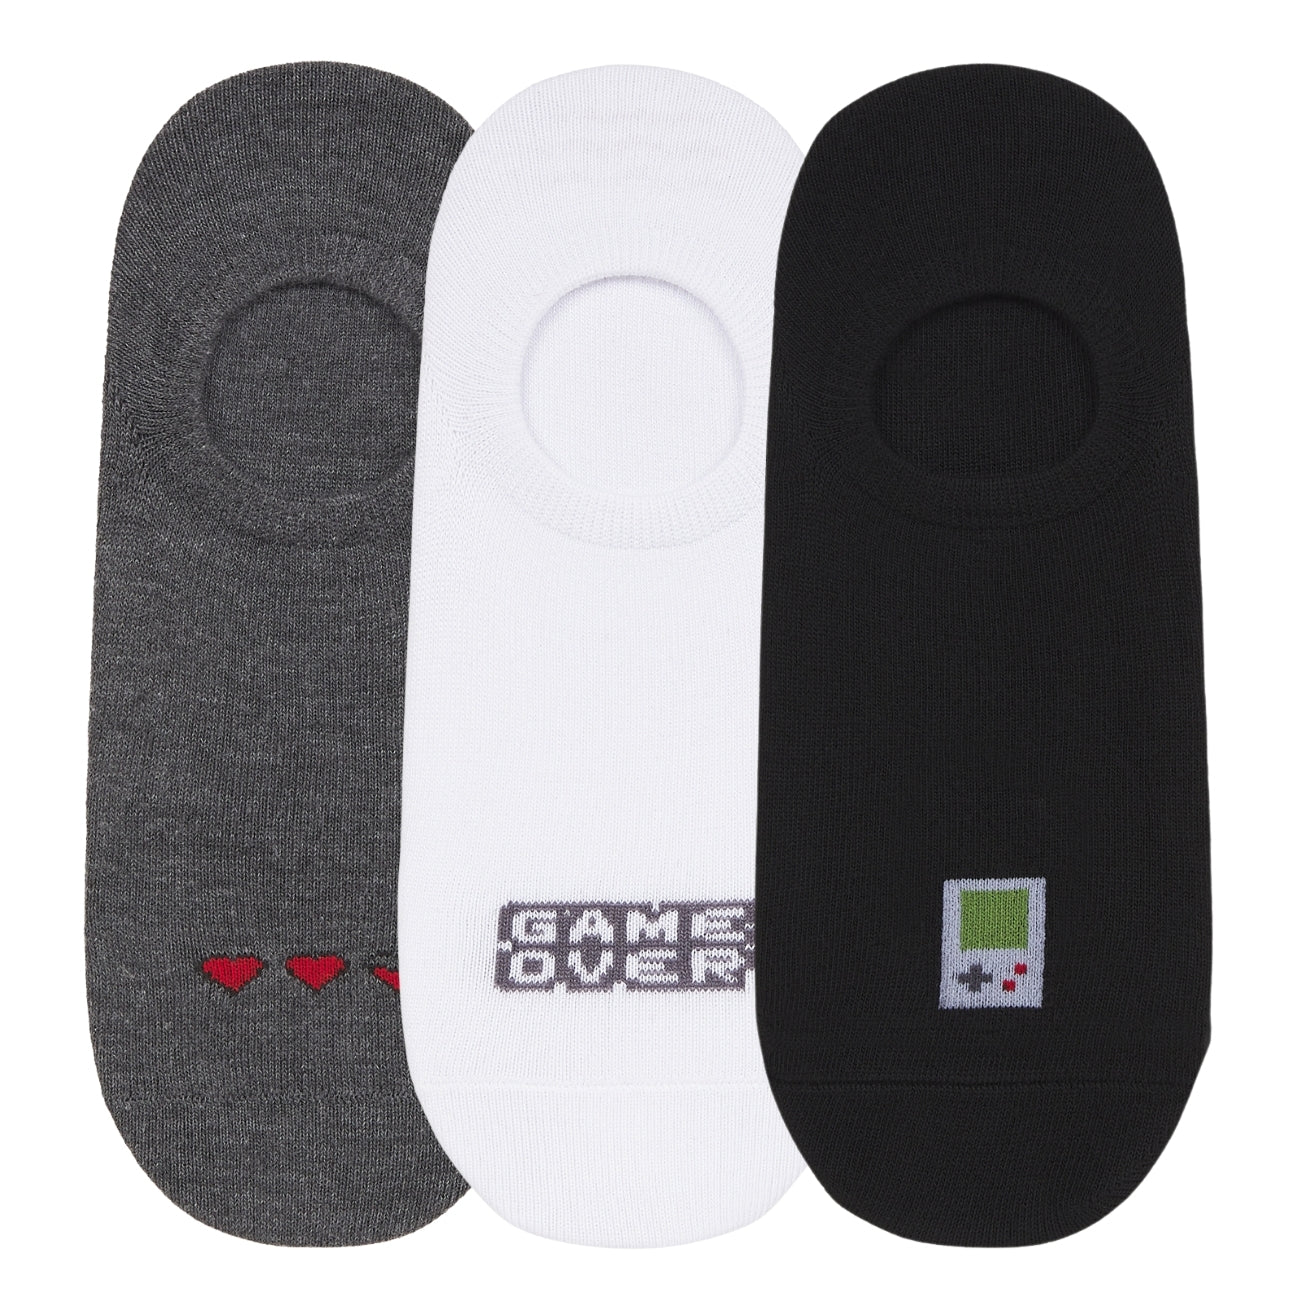 IDENTITY Apparel Retro Game Collection Plain Cotton Foot Socks with Print